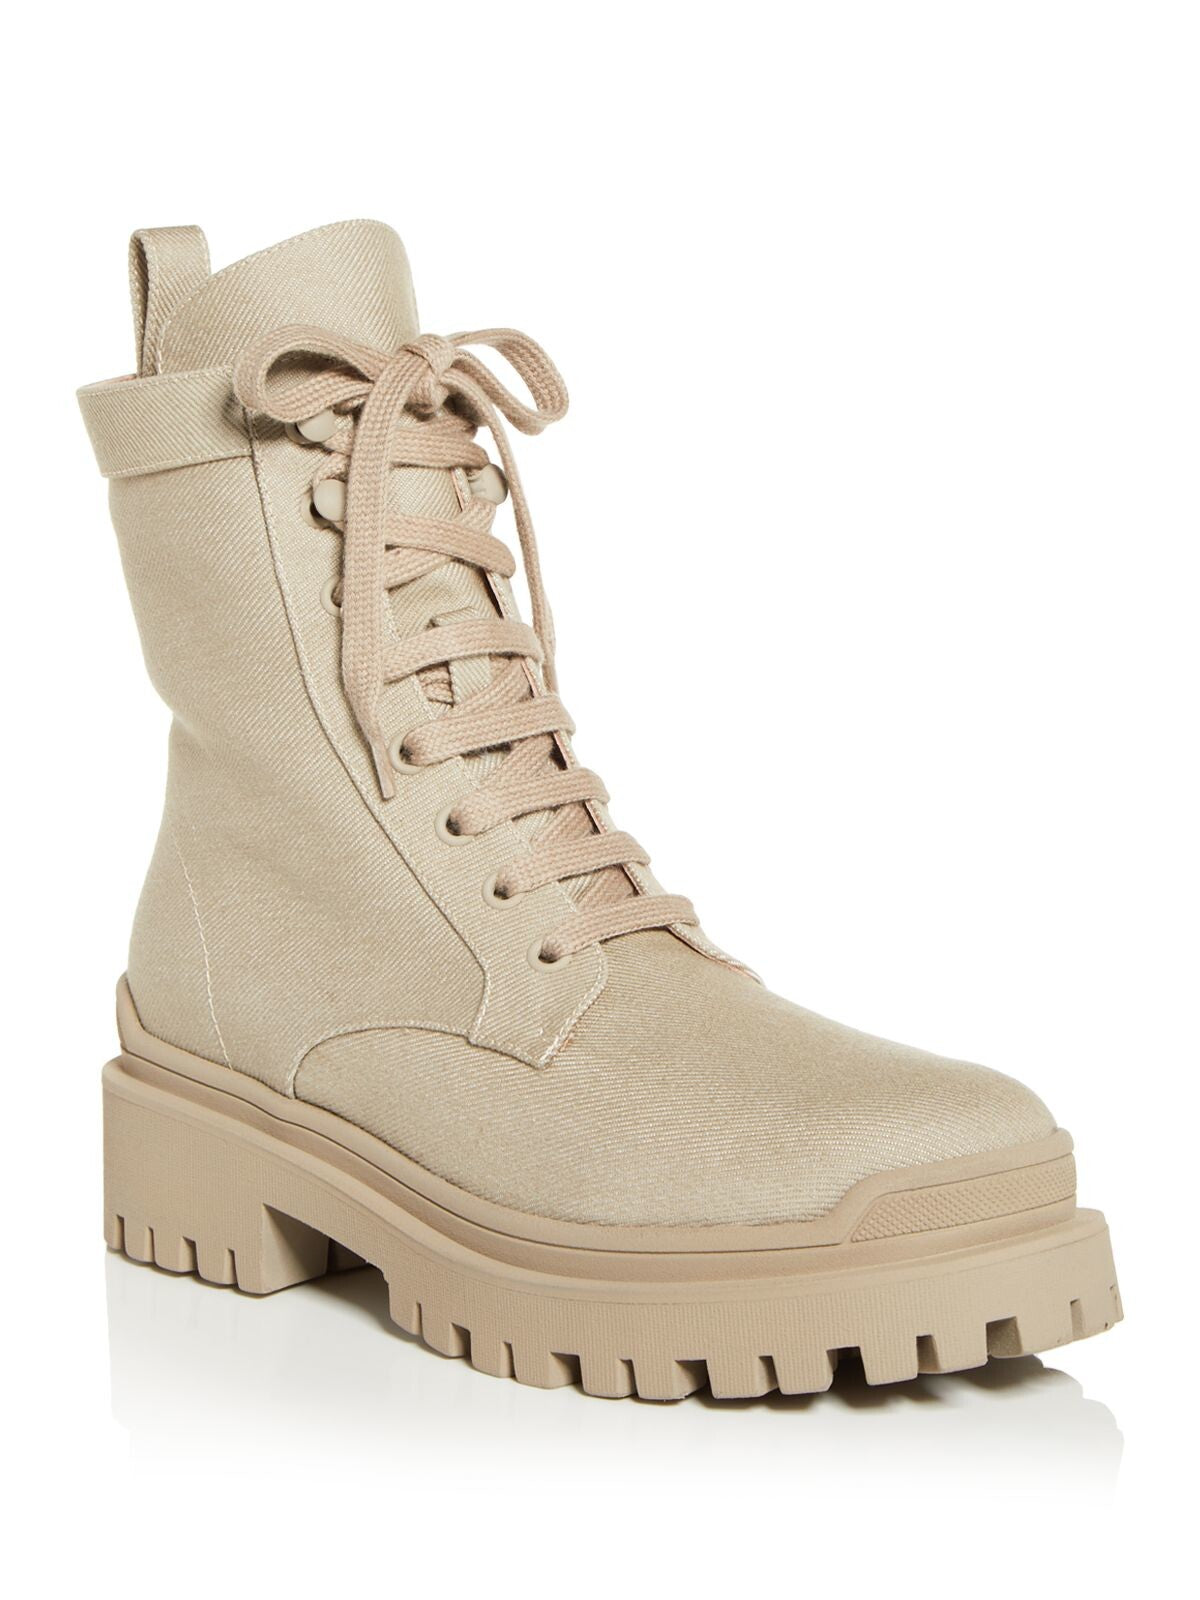 ILIO SMERALDO Womens Beige Pull Tab Cushioned Eyelet Sulcer Round Toe Block Heel Lace-Up Combat Boots 41